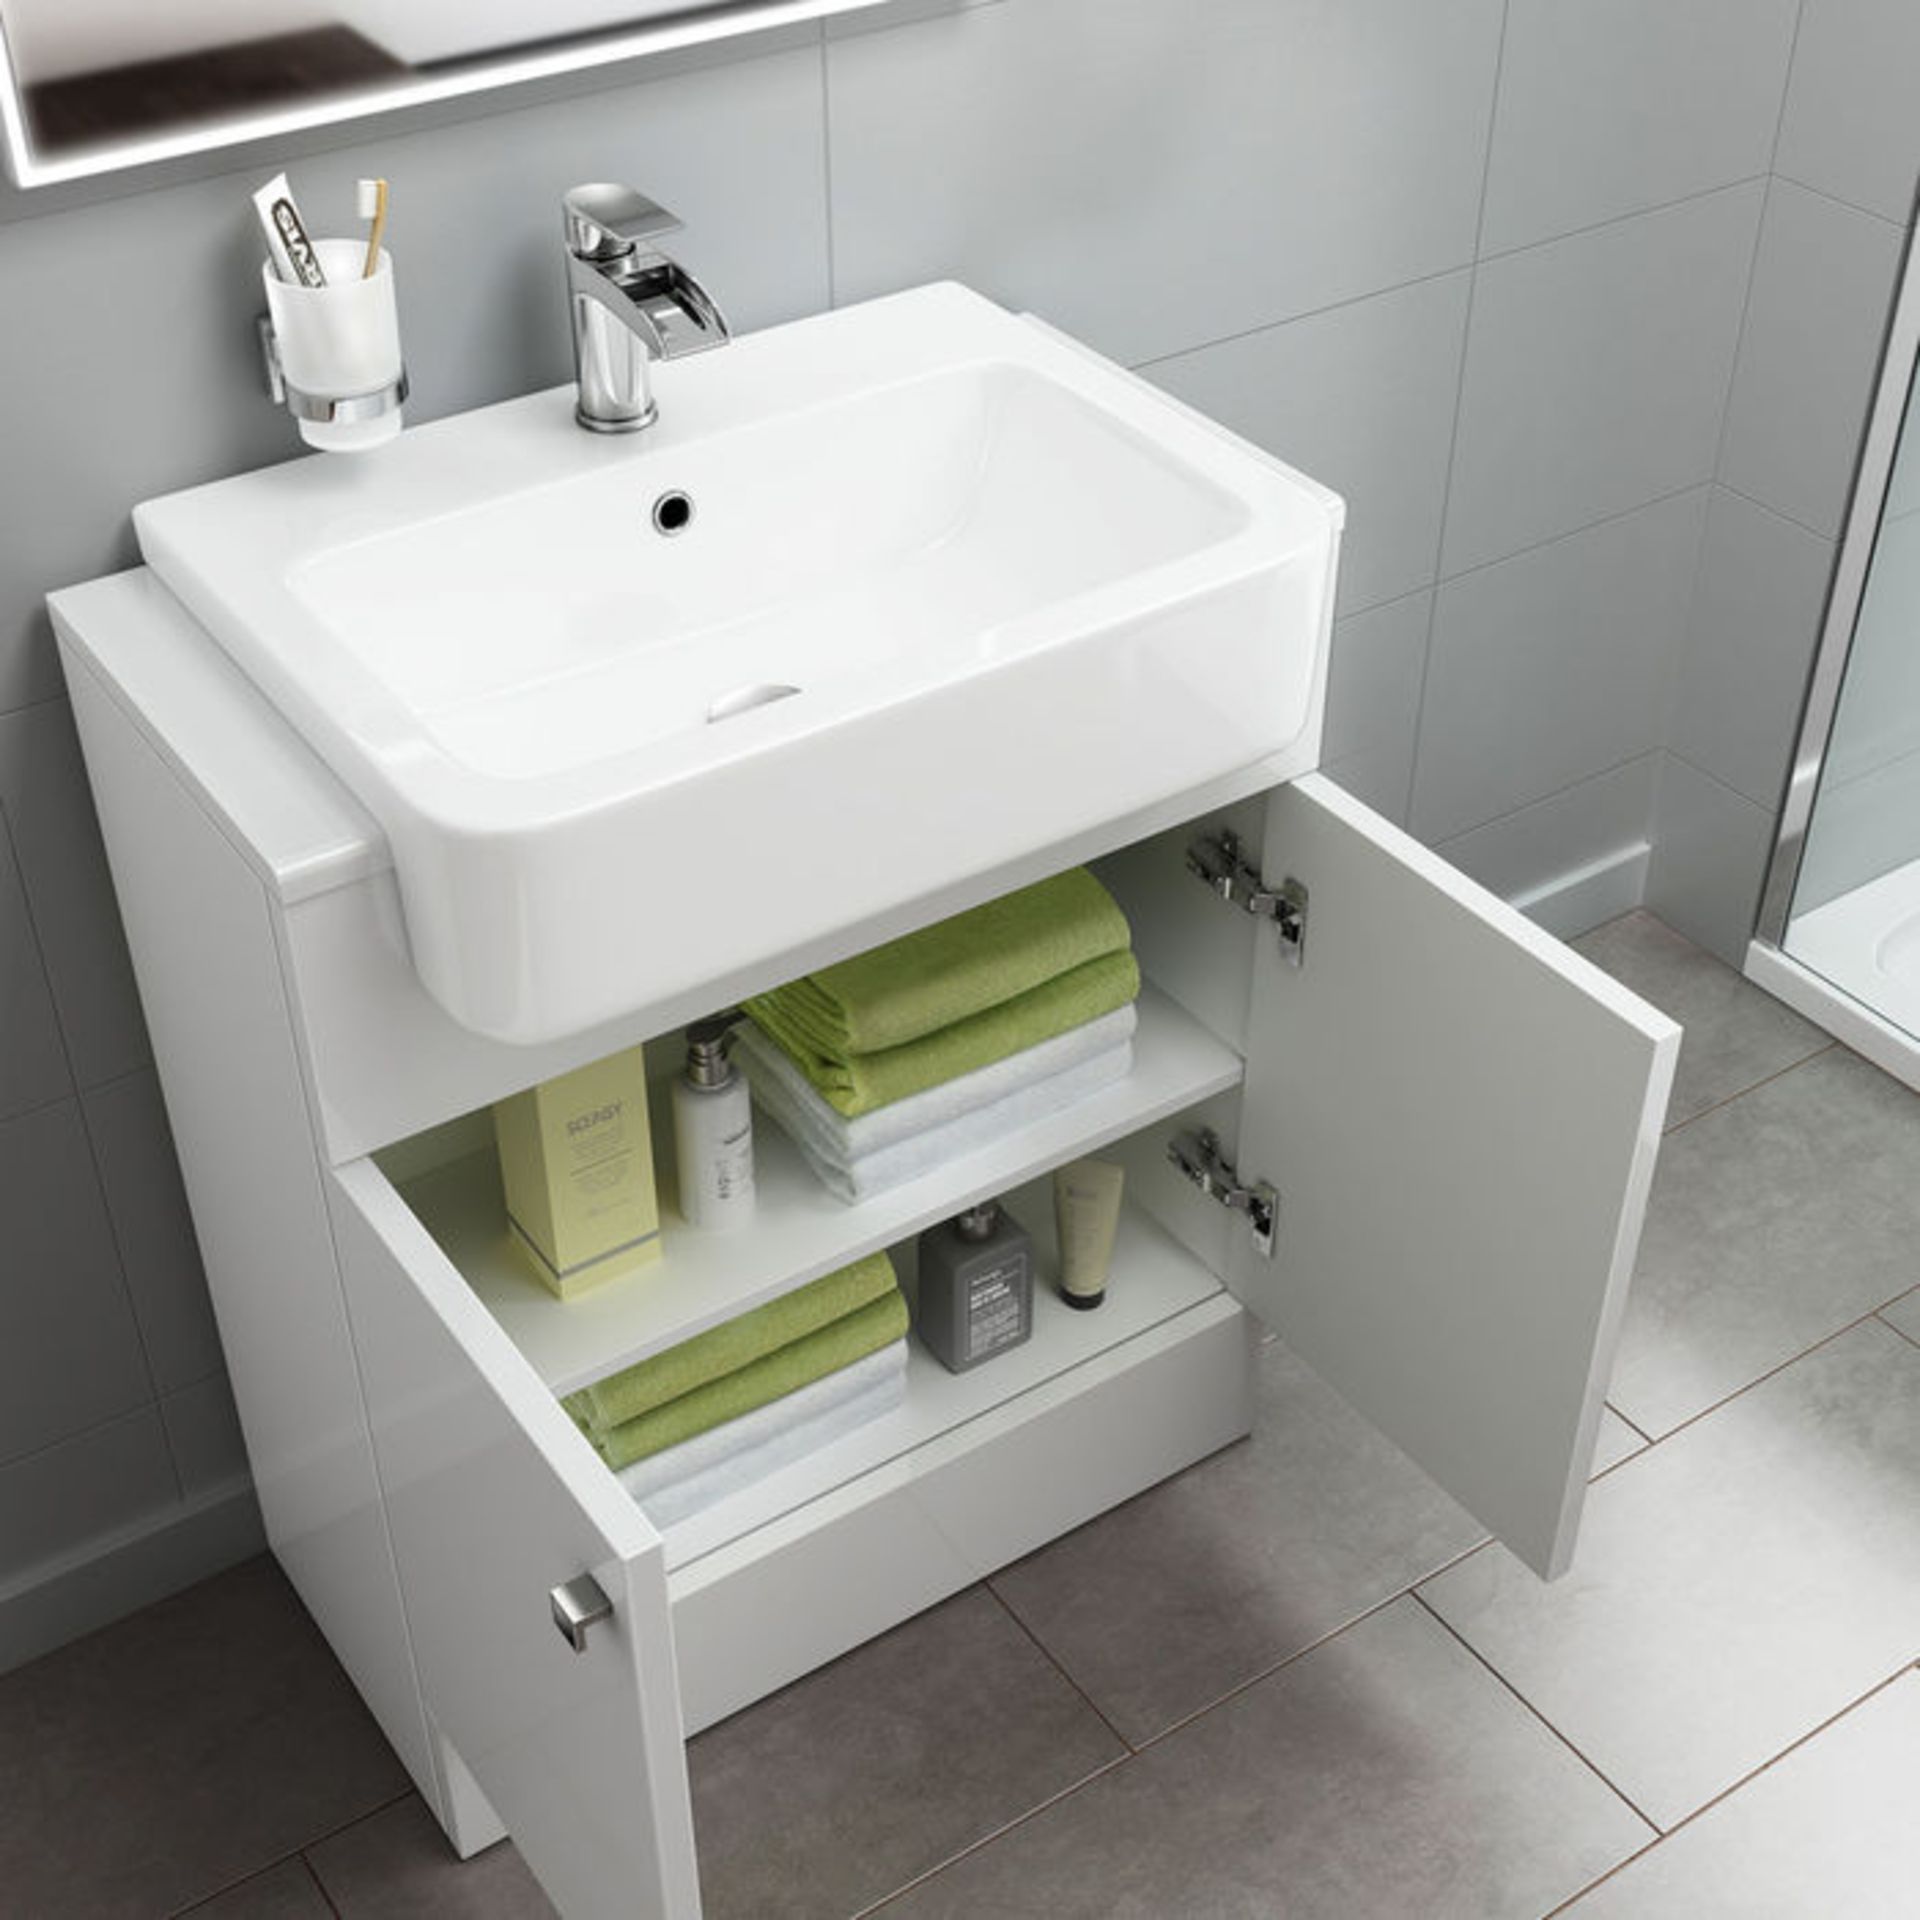 (ZL68) 660mm Harper Gloss White Basin Vanity Unit - Floor Standing. RRP £499.99. Comes complete with - Image 2 of 4